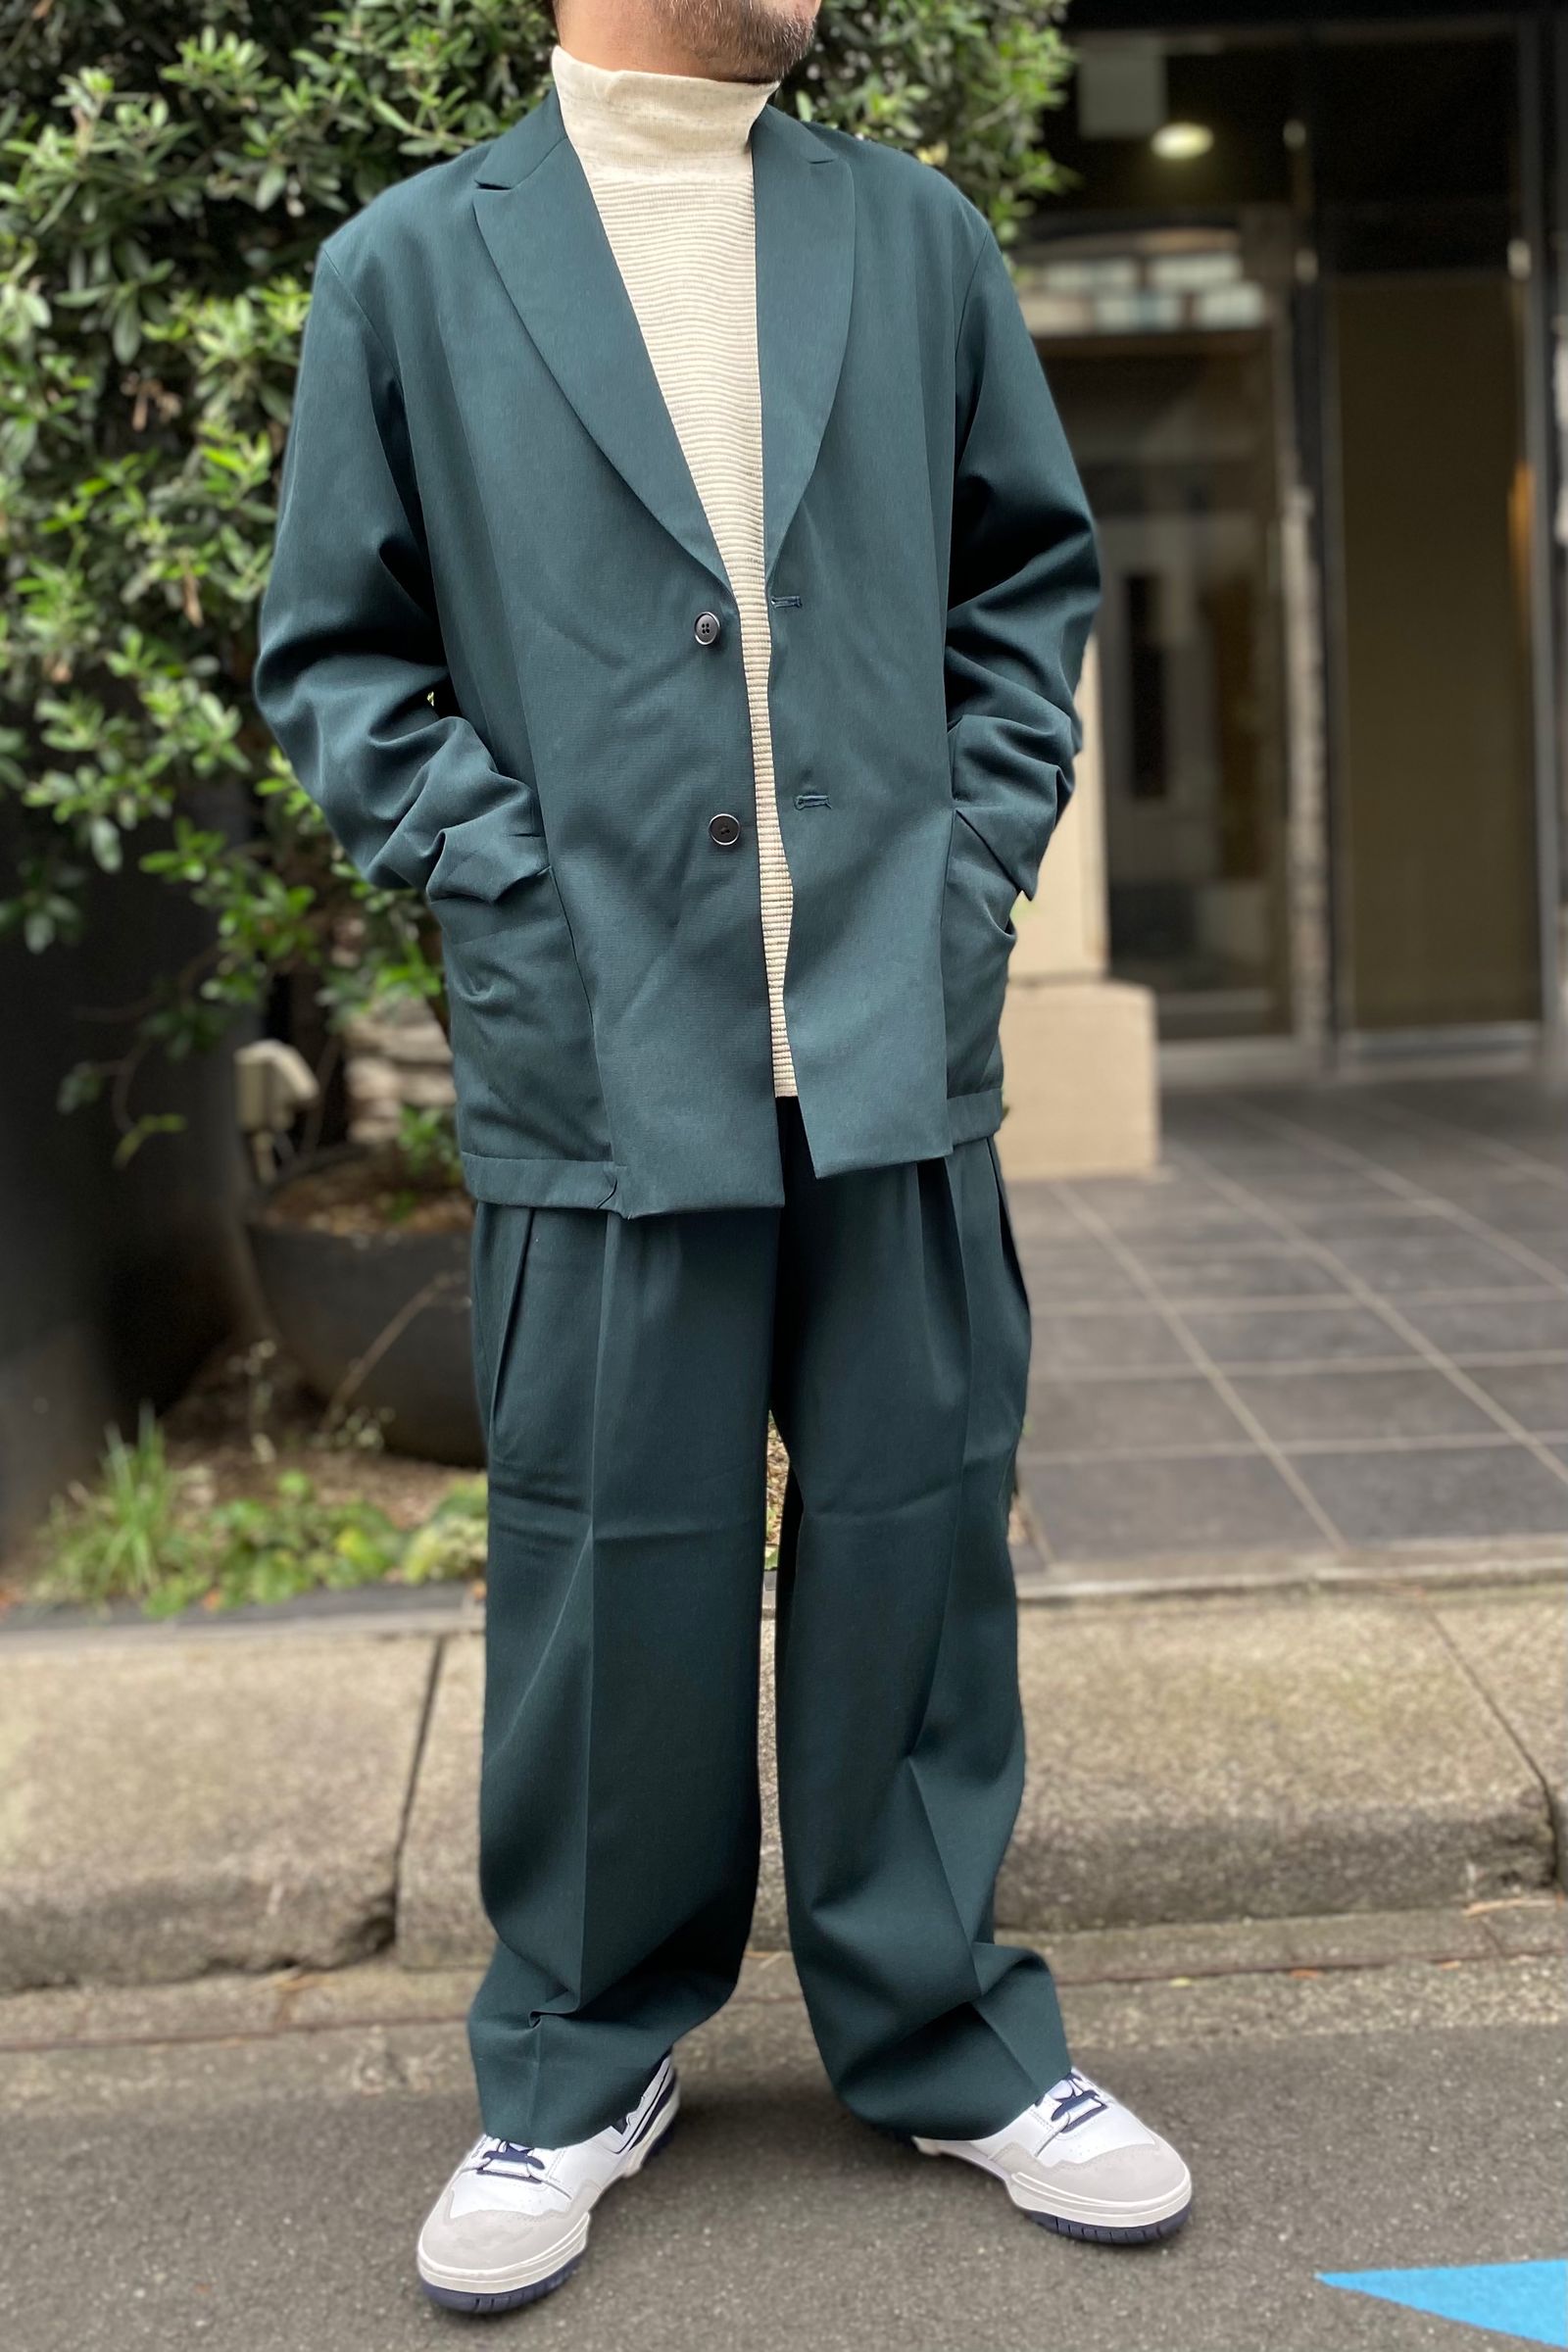 POLYPLOID - wide tapered pants c 21aw 9月25日発売! | asterisk